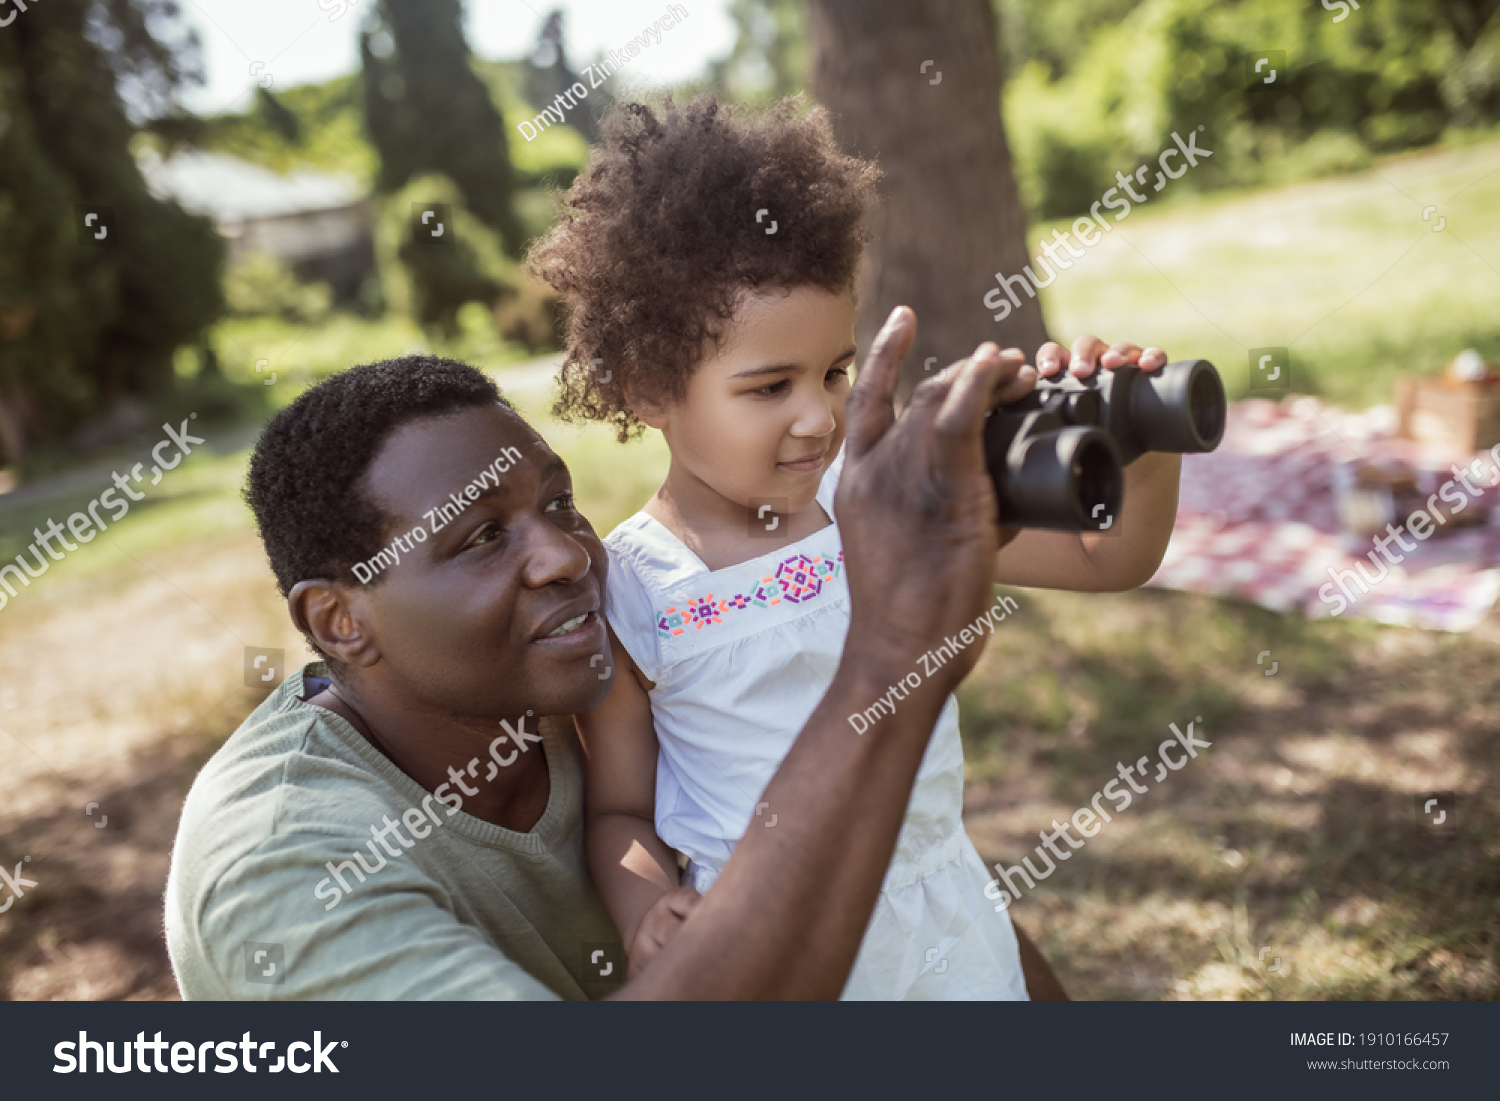 New experience. Dark-skinned cute girl holding a binocular and looking interested #1910166457